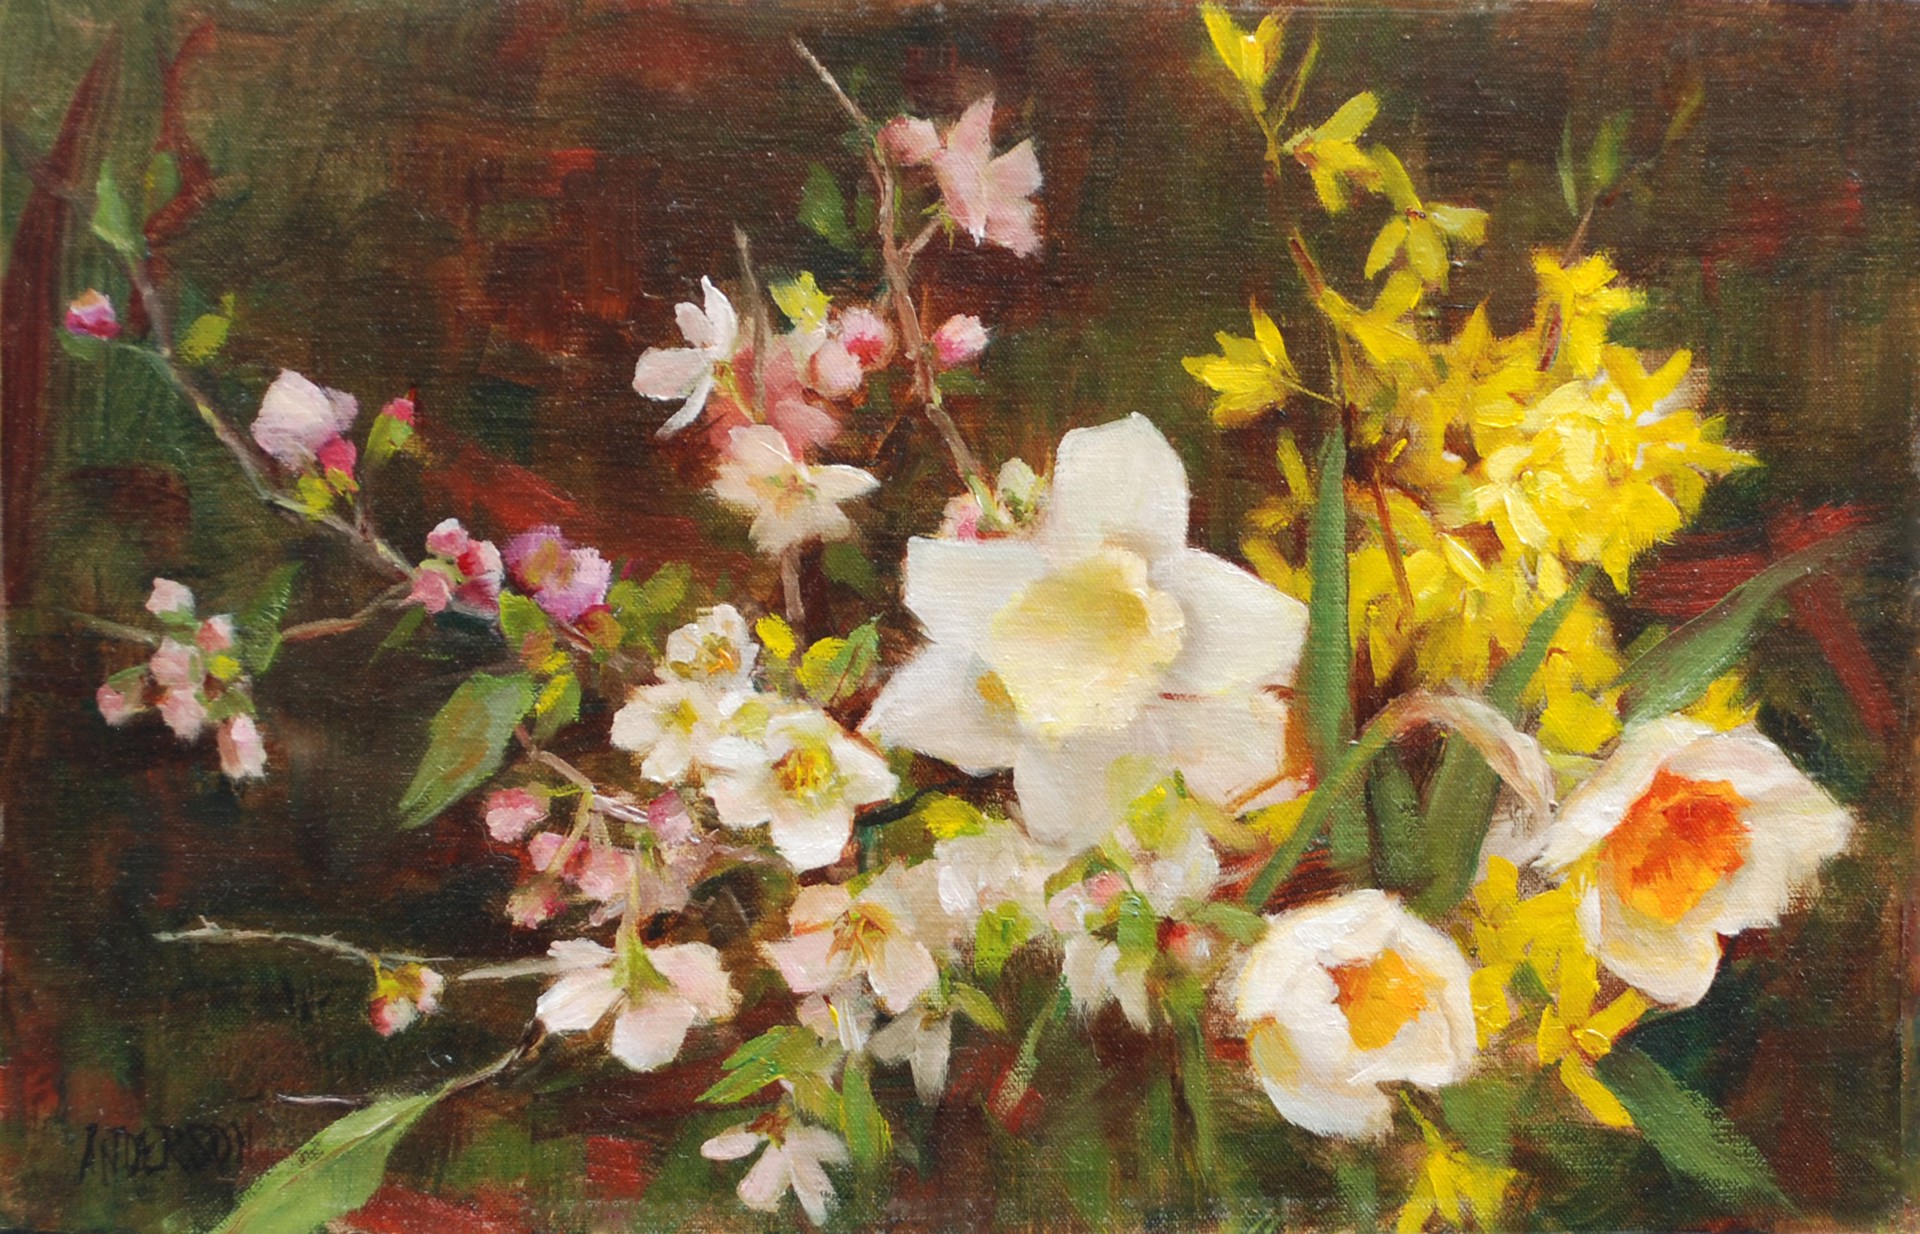 Spring with Apple Blossoms & Daffodils by Kathy Anderson